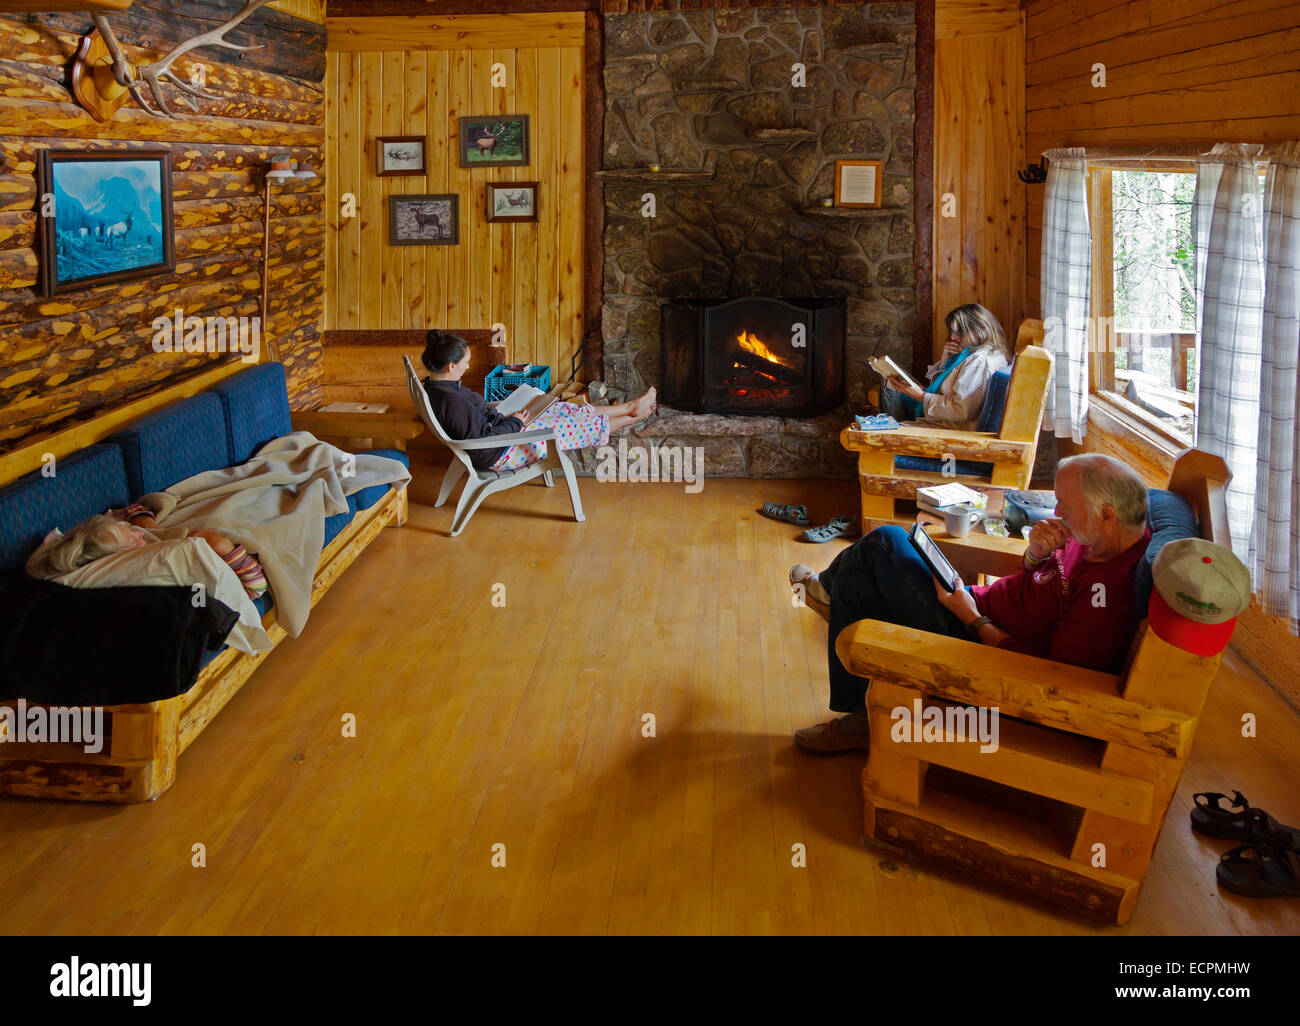 VACATIONERS enjoy a rustic yet comfortable cabin at OLEO RANCH at 10500 feet - SOUTHERN COLORADO MR Stock Photo